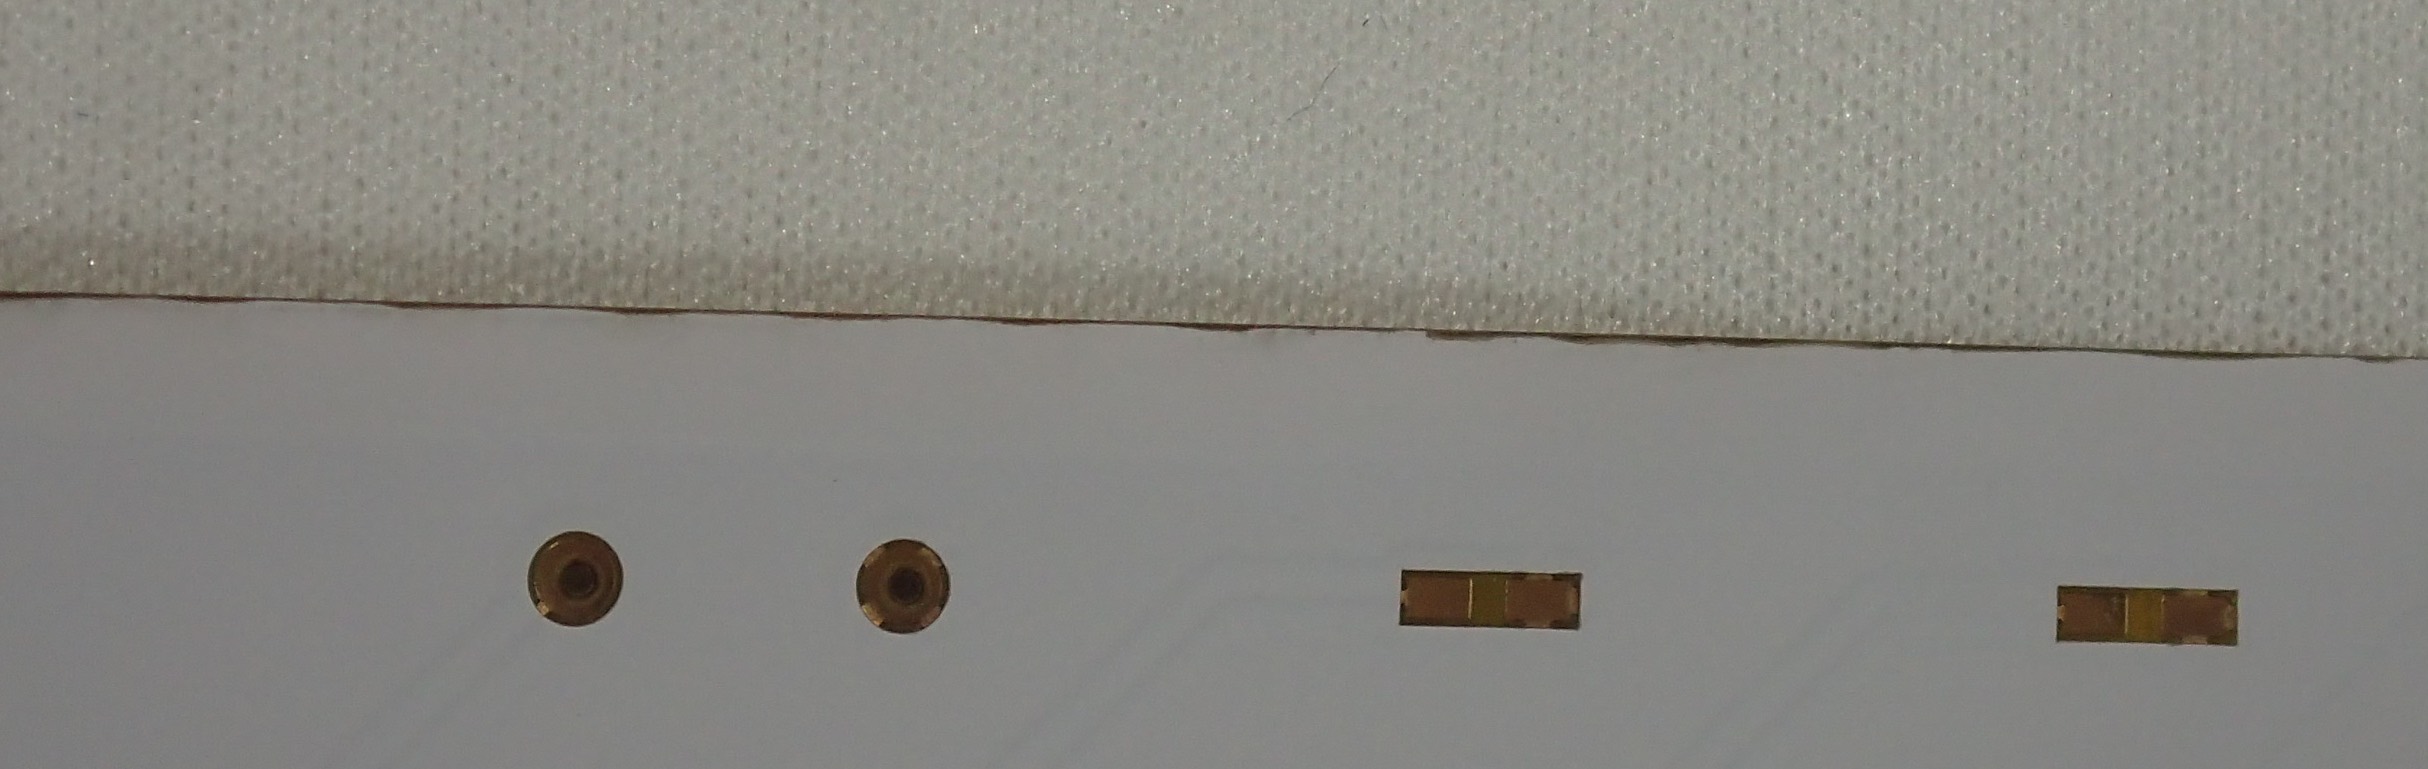 Picture showing the dirty edge of a pcb